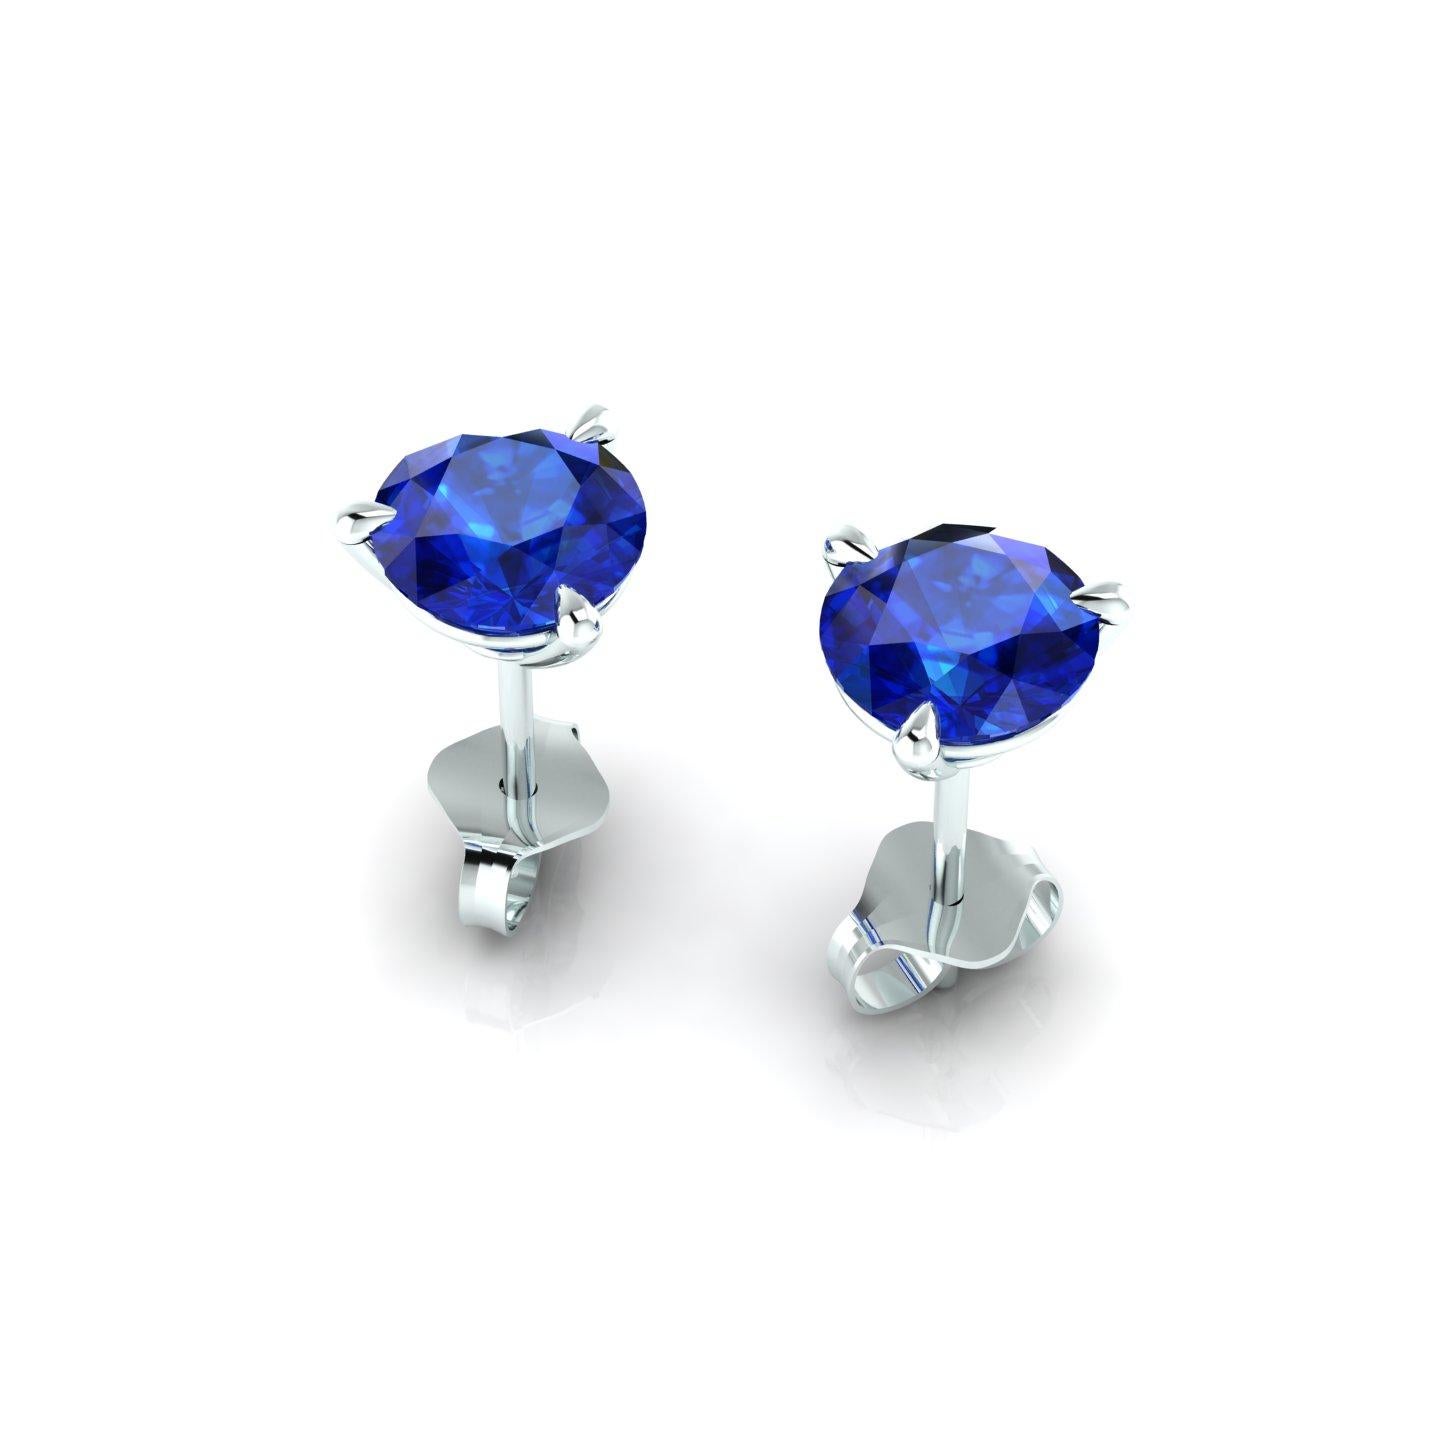 2.1 Carat Blue Sapphires Martini Ear Studs in Platinum, made in New York City with the best Italian craftsmanship,

Perfect gift for any woman and every age, easy to wear from the office to a special evening out.

